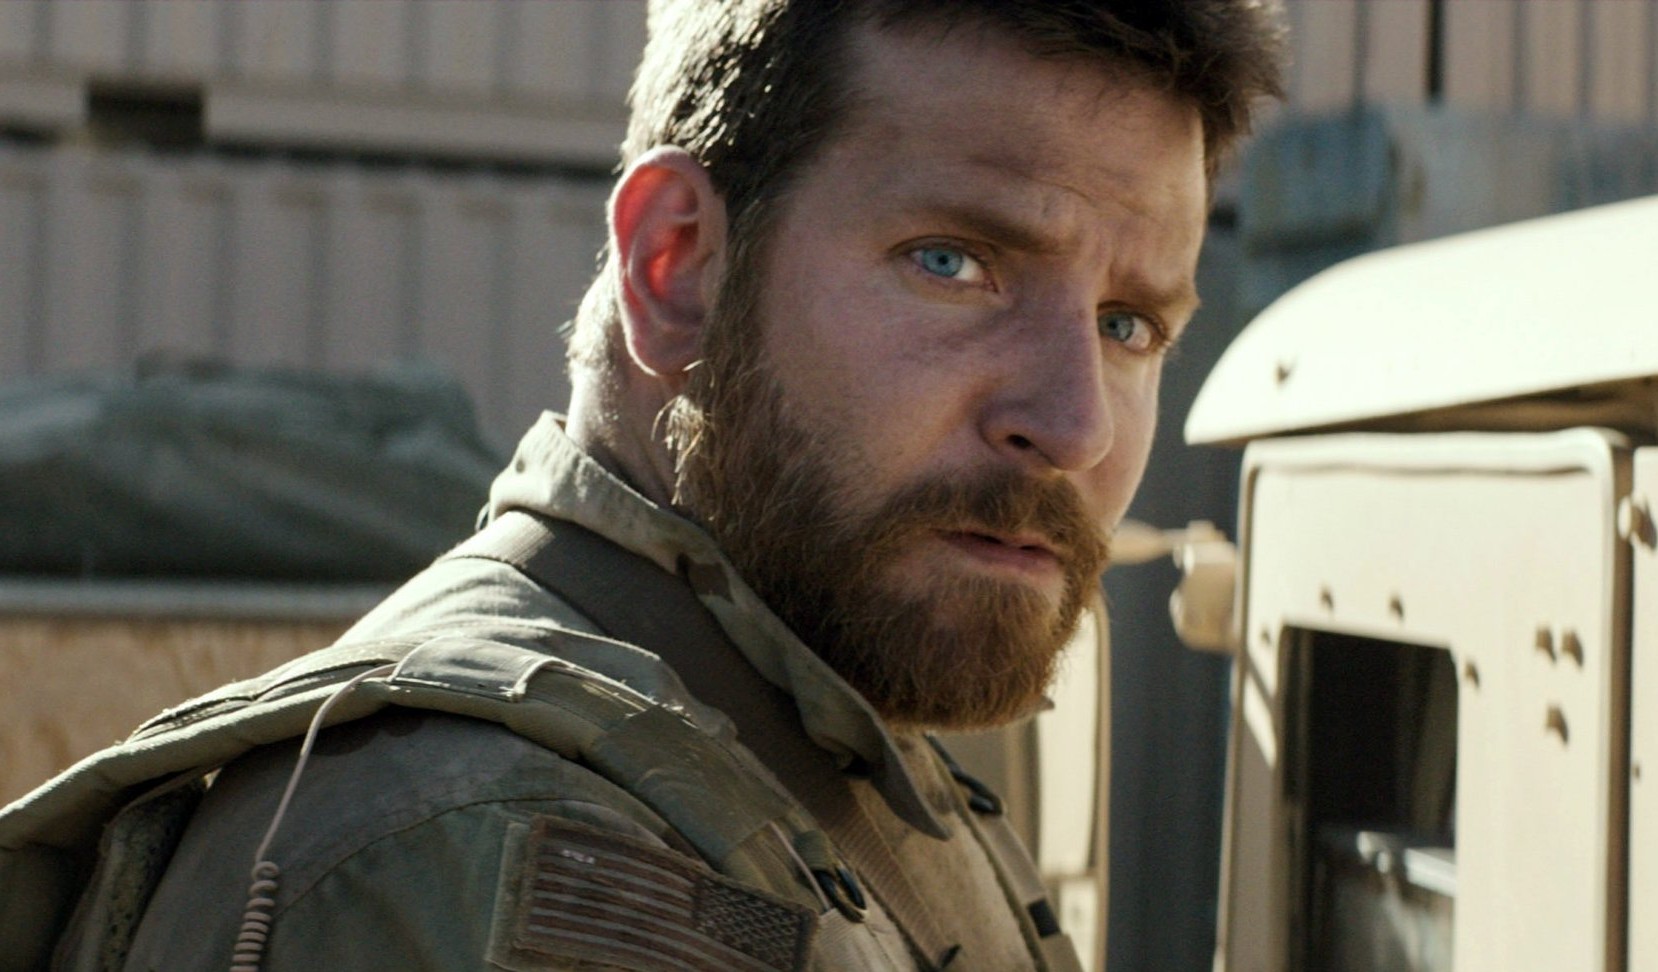 Screenwriter Jason Hall on Capturing the Honor and Integrity of 'American Sniper'